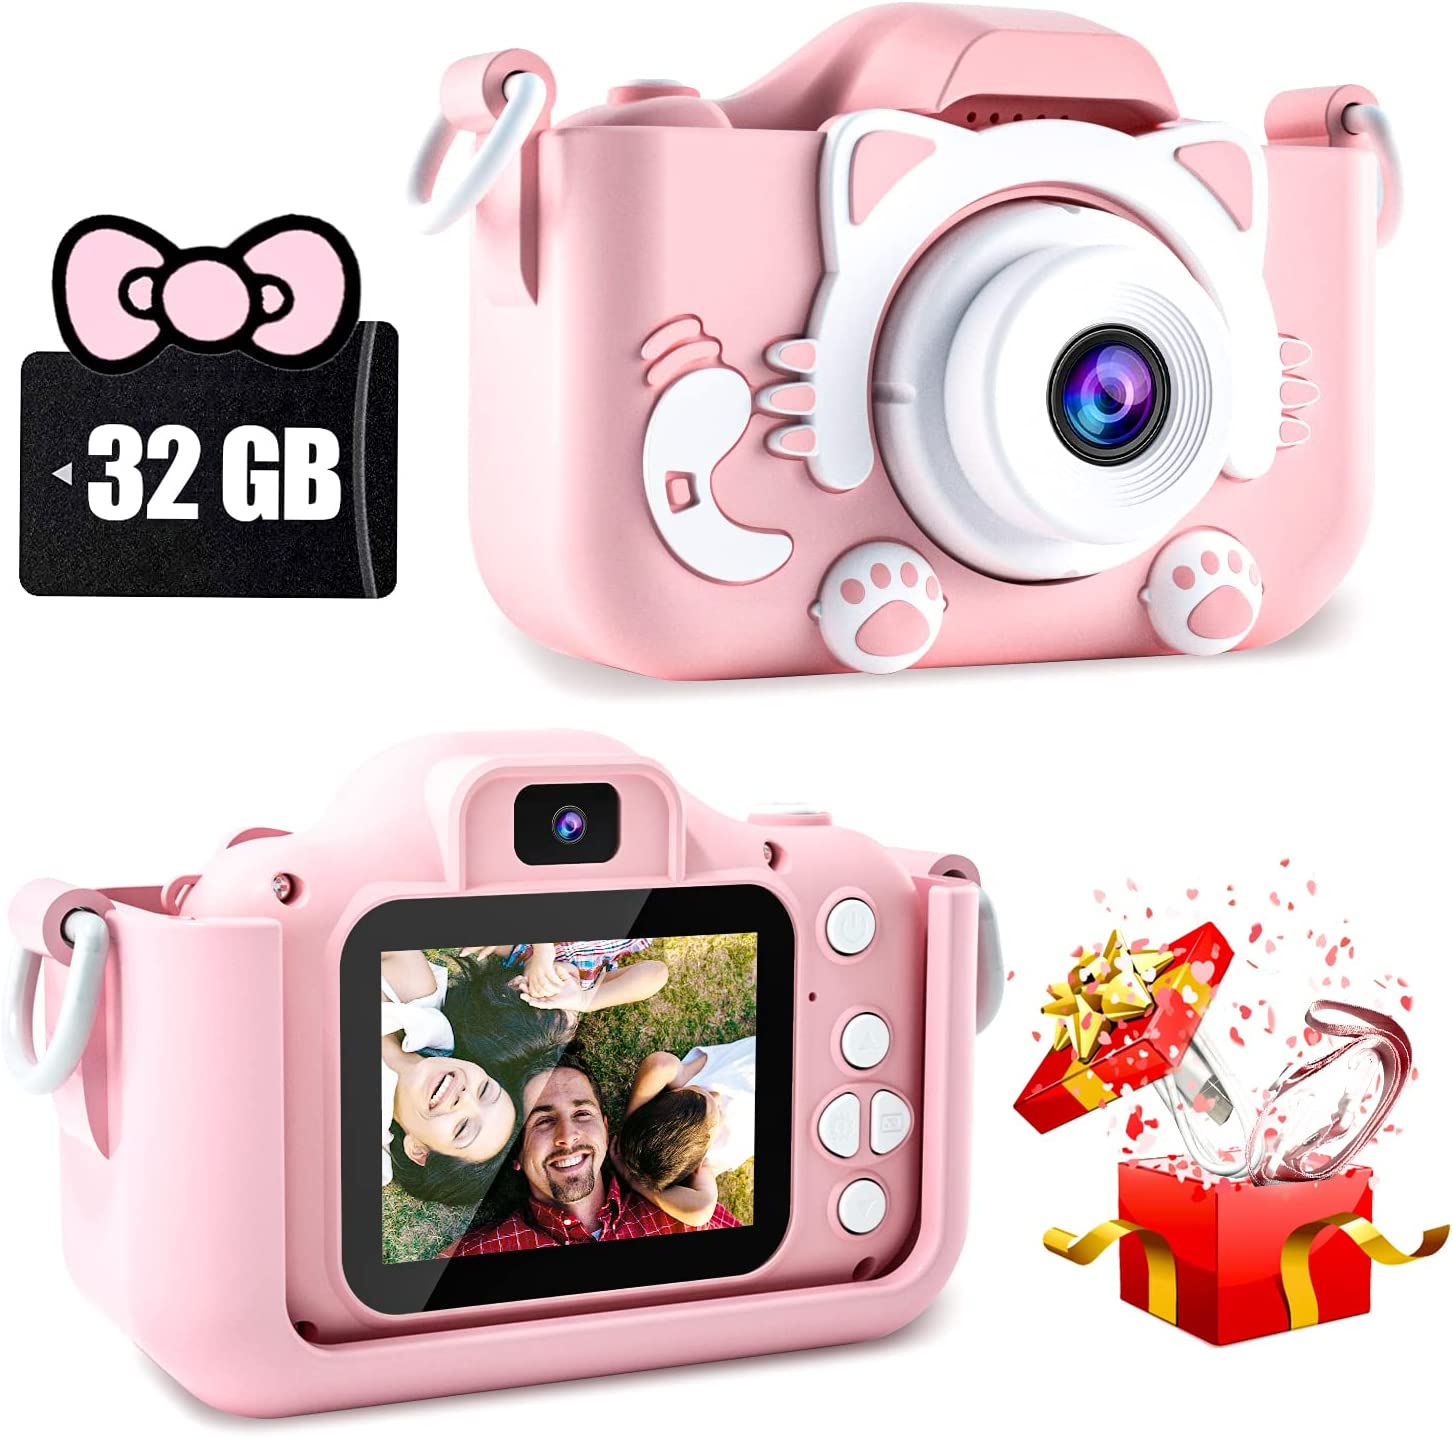 Digital Cameras 1080P HD Children Cameras 2 Inch Screen Dual Lens Kids Camera 20MP Selfie Camera with 32 GB Card Birthday Holiday Gifts for Kid